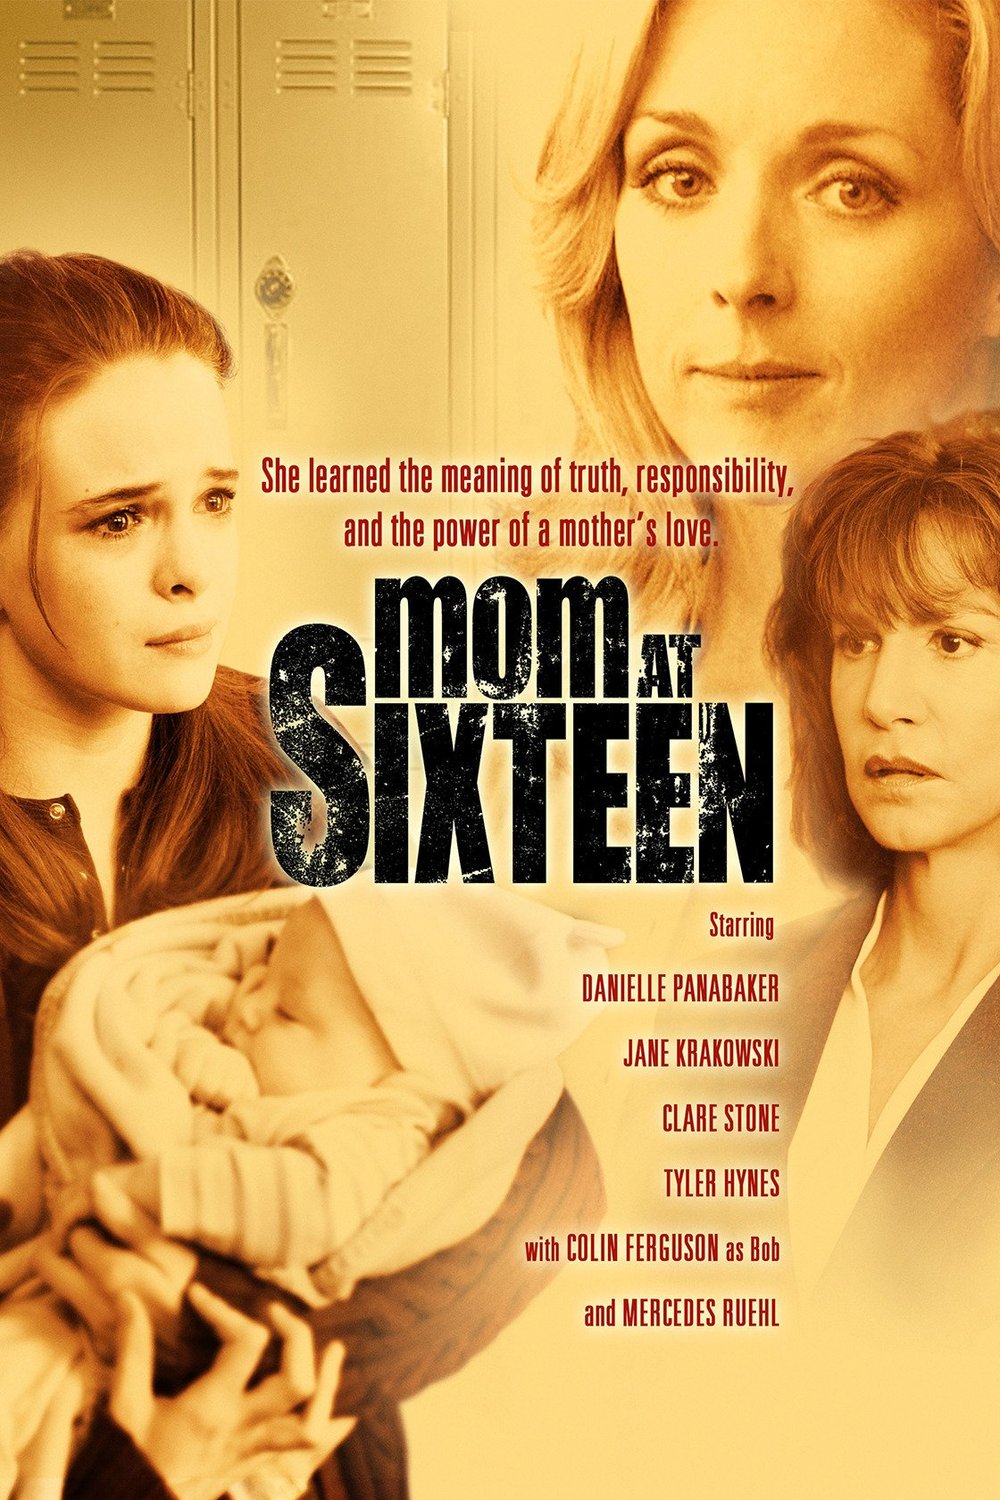 Poster of the movie Mom at Sixteen